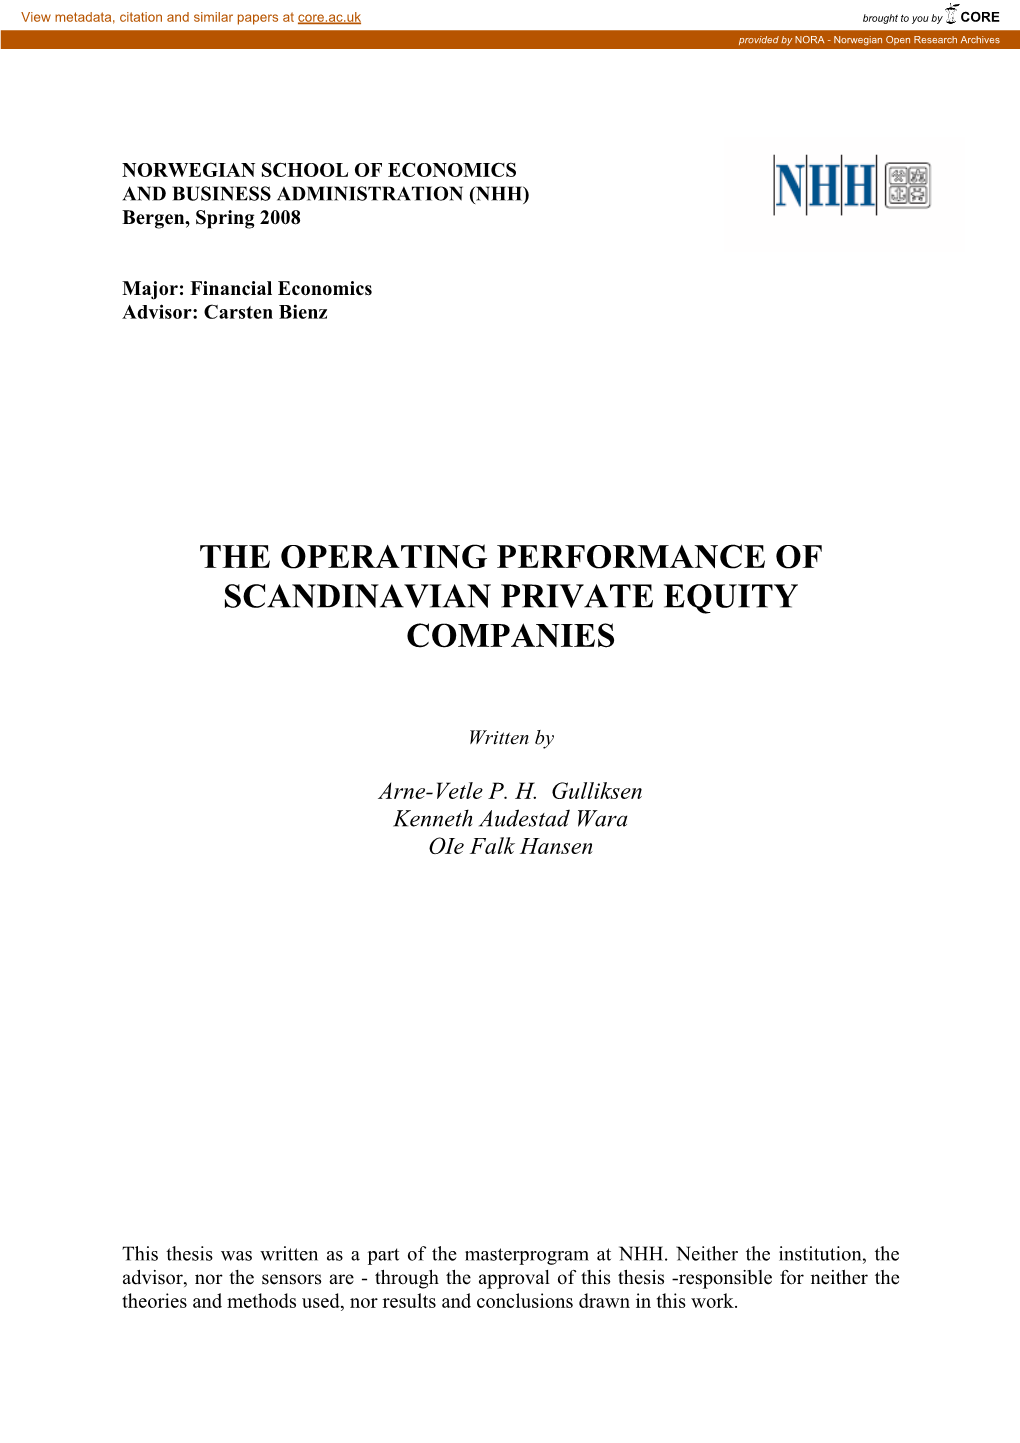 The Operating Performance of Scandinavian Private Equity Companies